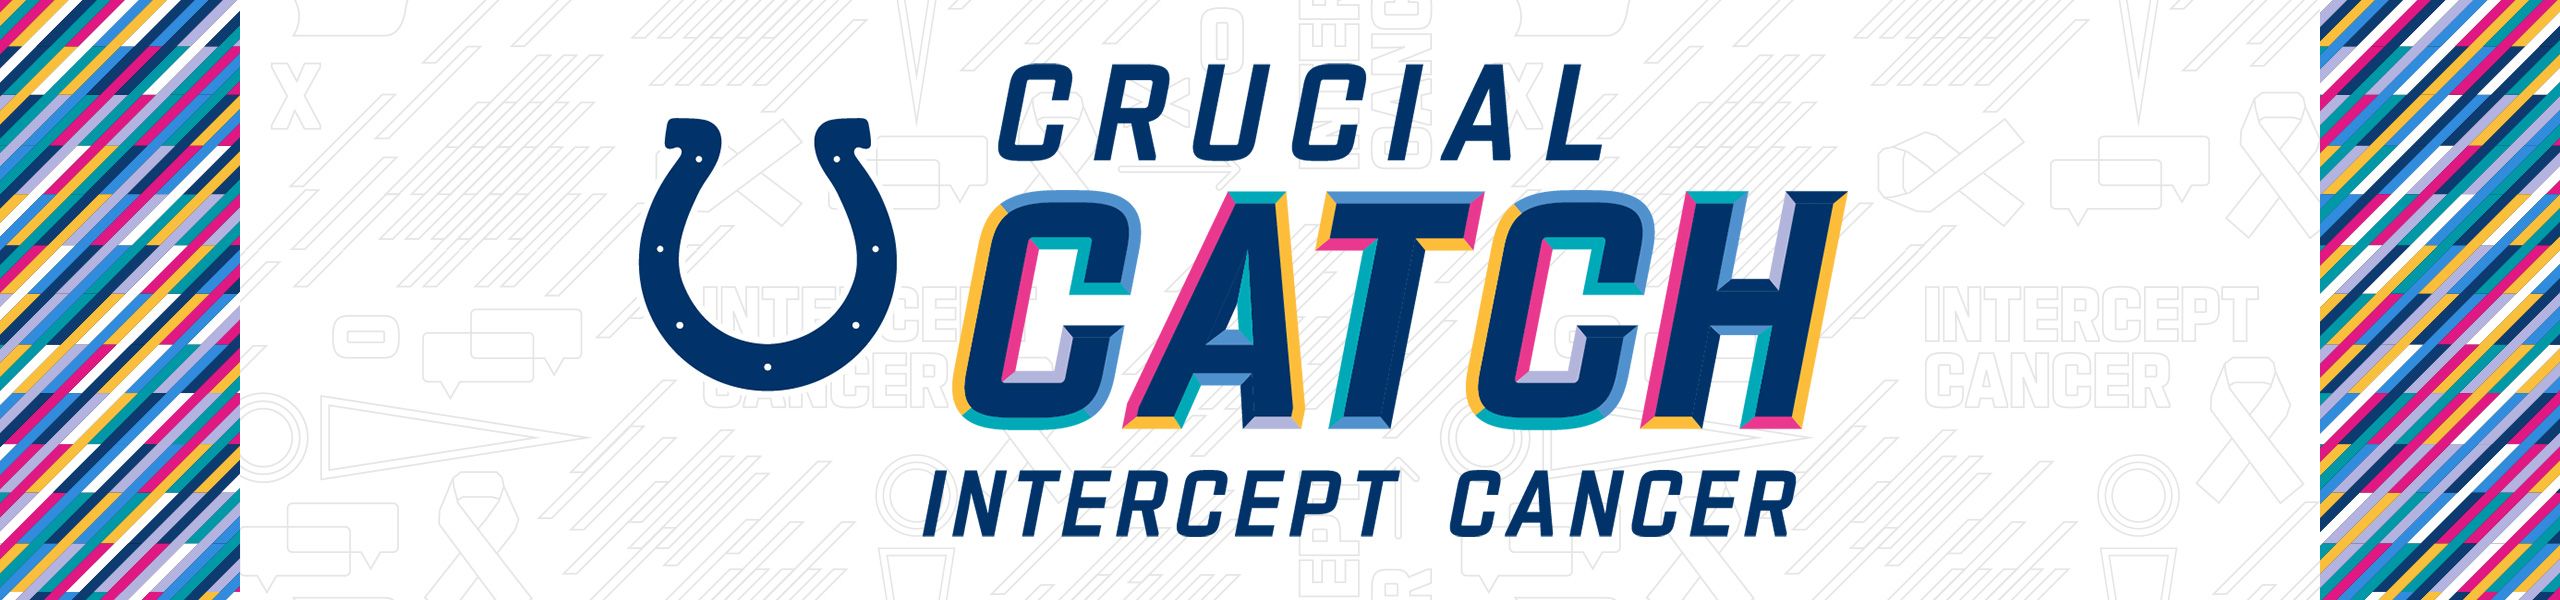 Colts Crucial Catch Initiative  Indianapolis Colts 